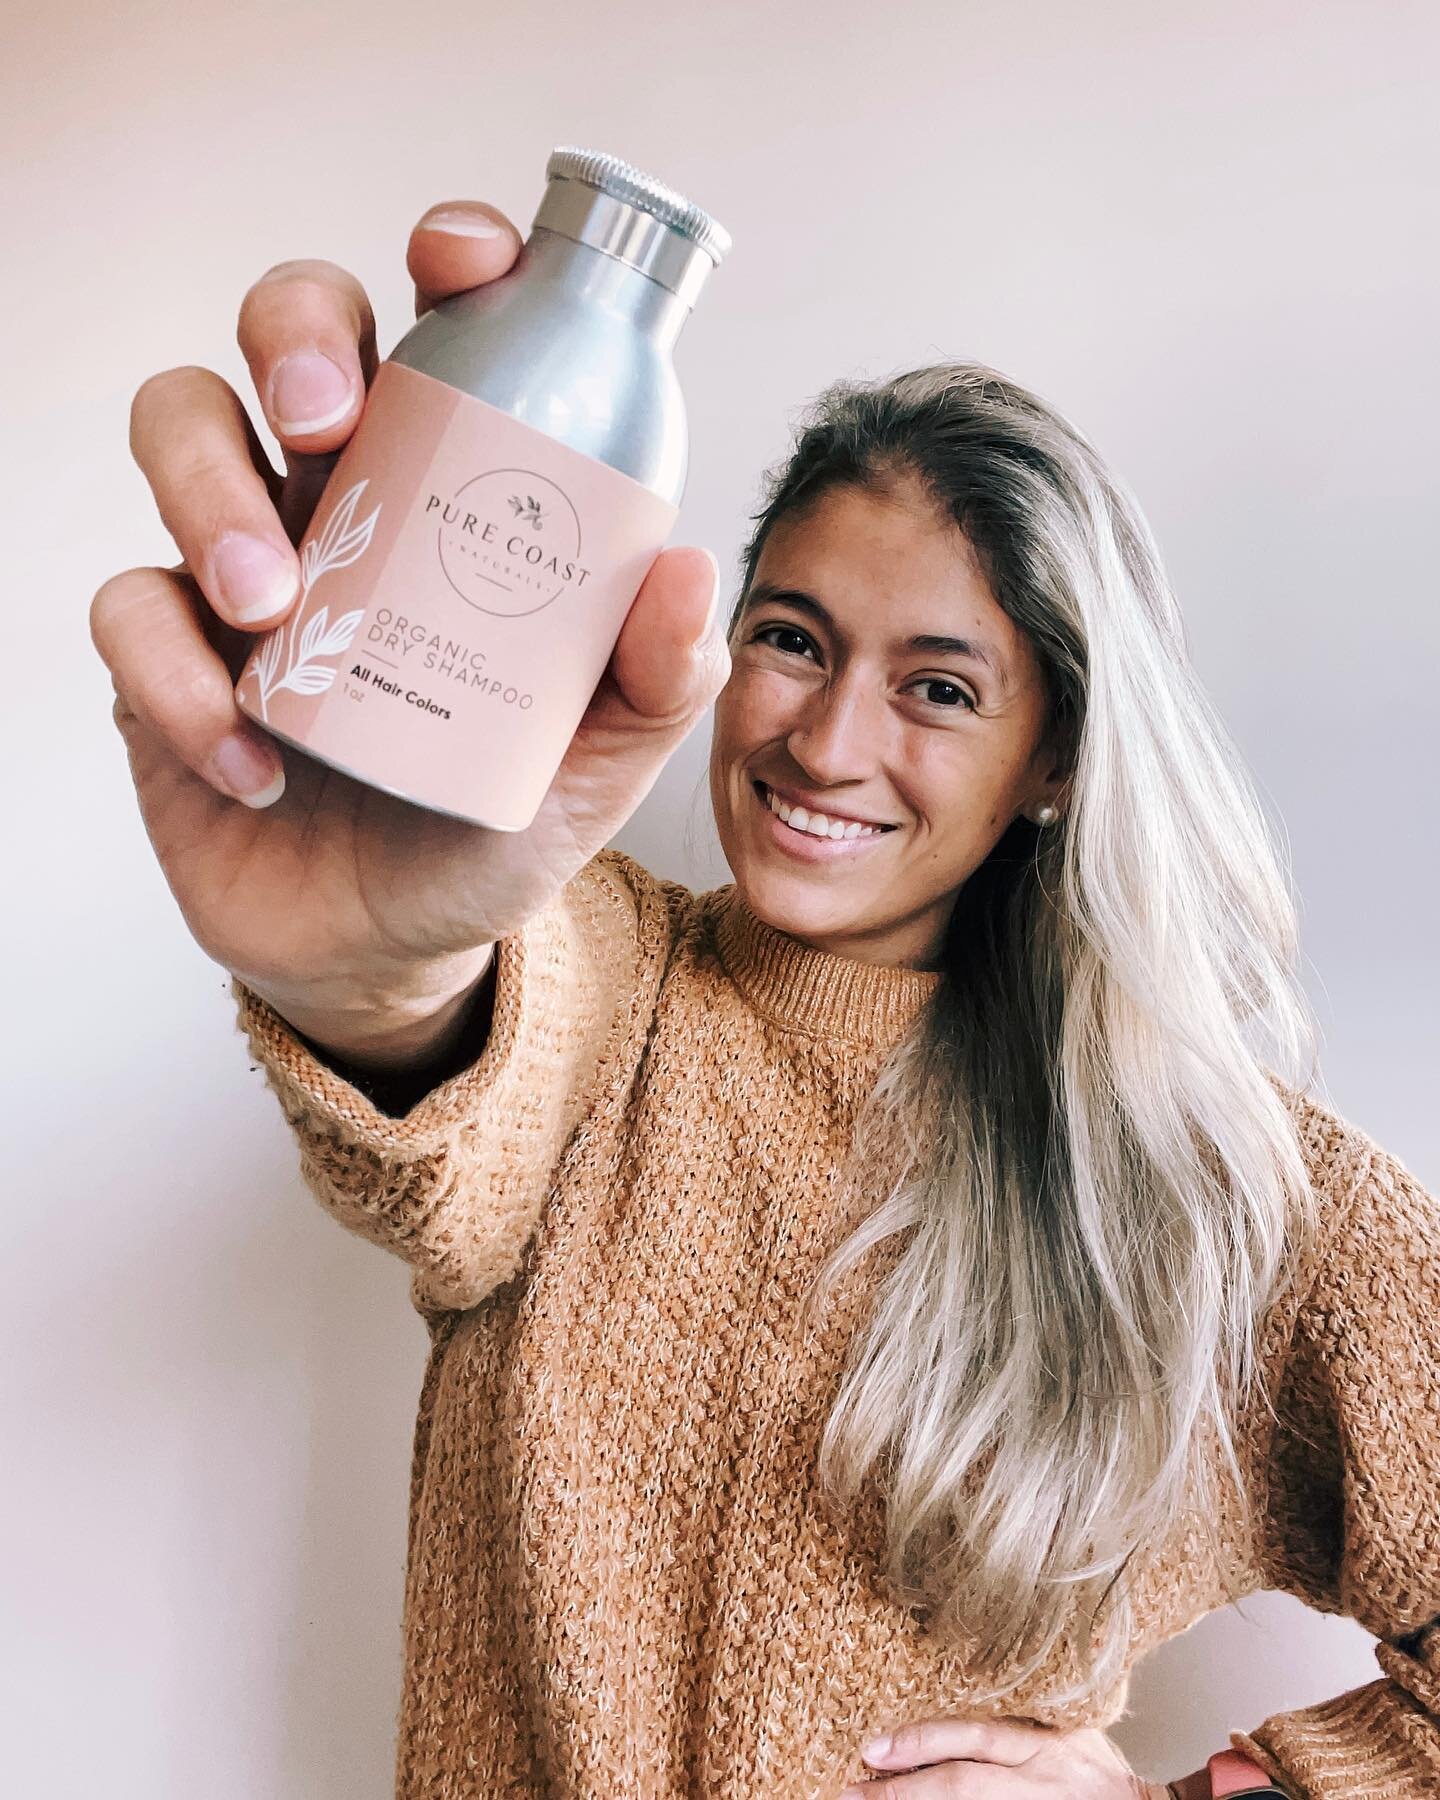 GIVEAWAY🎉 We are so excited for the @fentonnc market this Saturay! One of the new vendors you will be able to shop from is @purecoastnaturals ✨

Pure Coast Naturals is a women owned zero waste brand passionate about decreasing plastic pollution and 